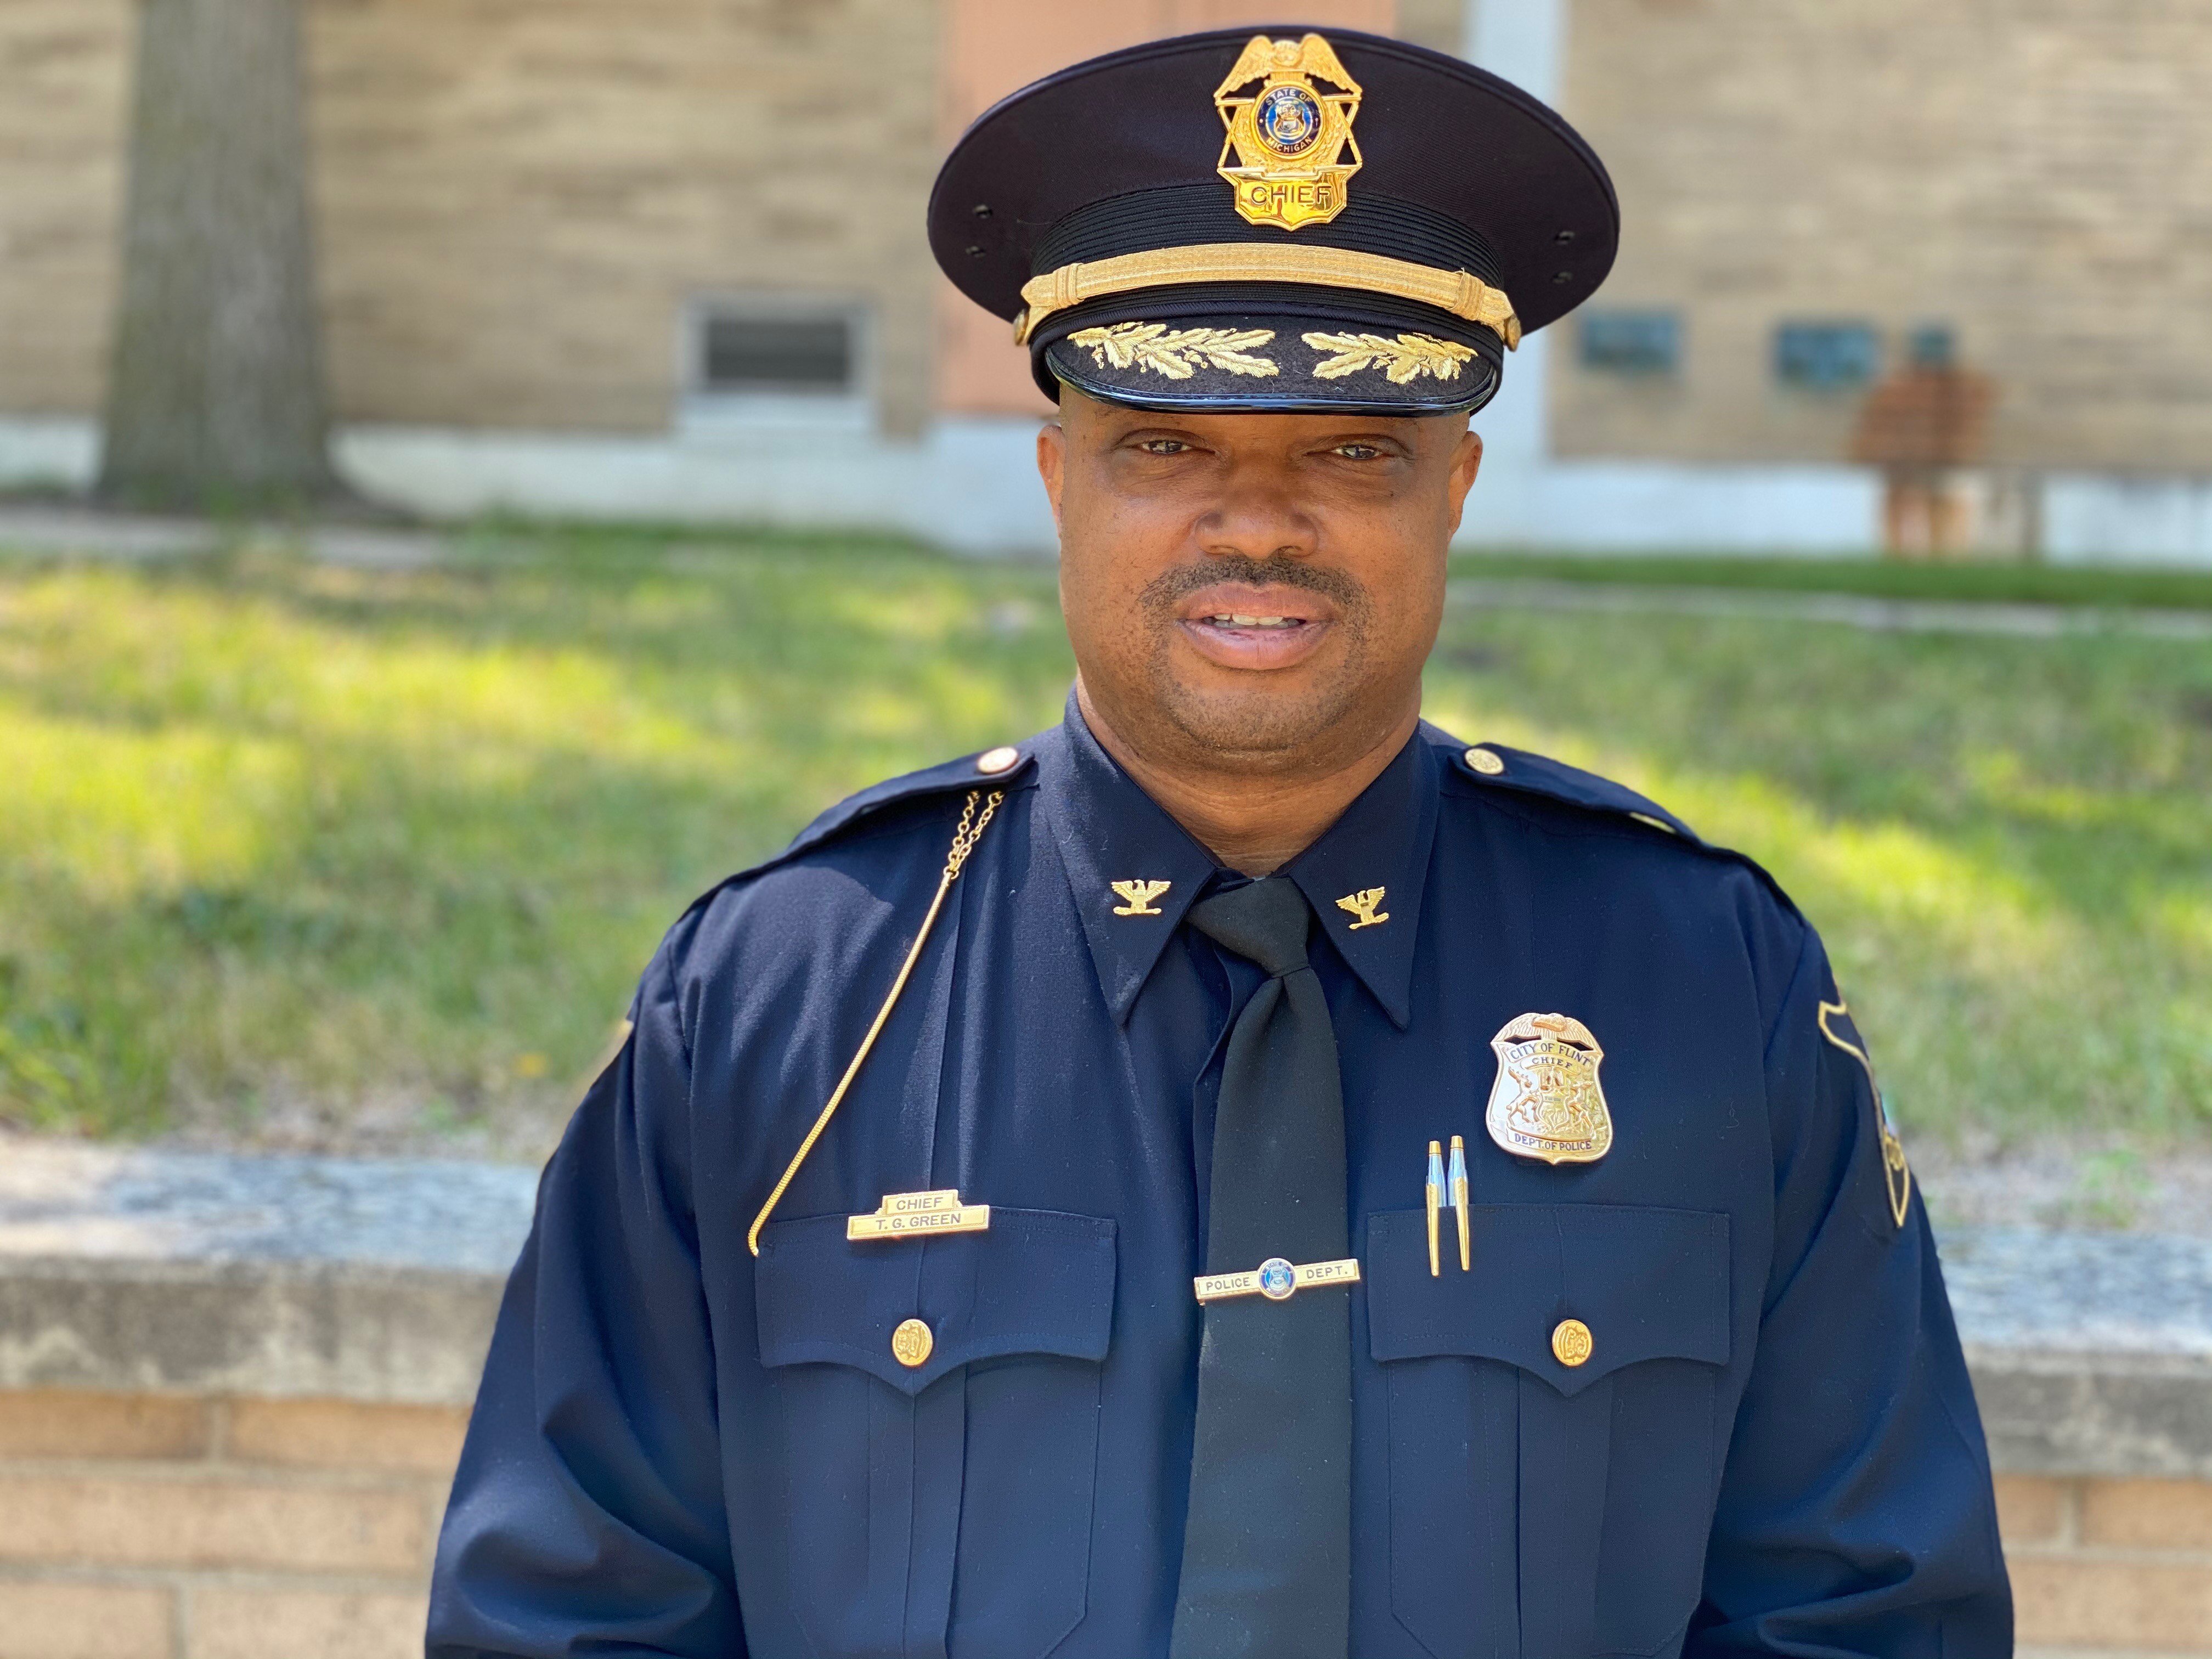 New city of Flint Chief of Police Terence Green took office in September.